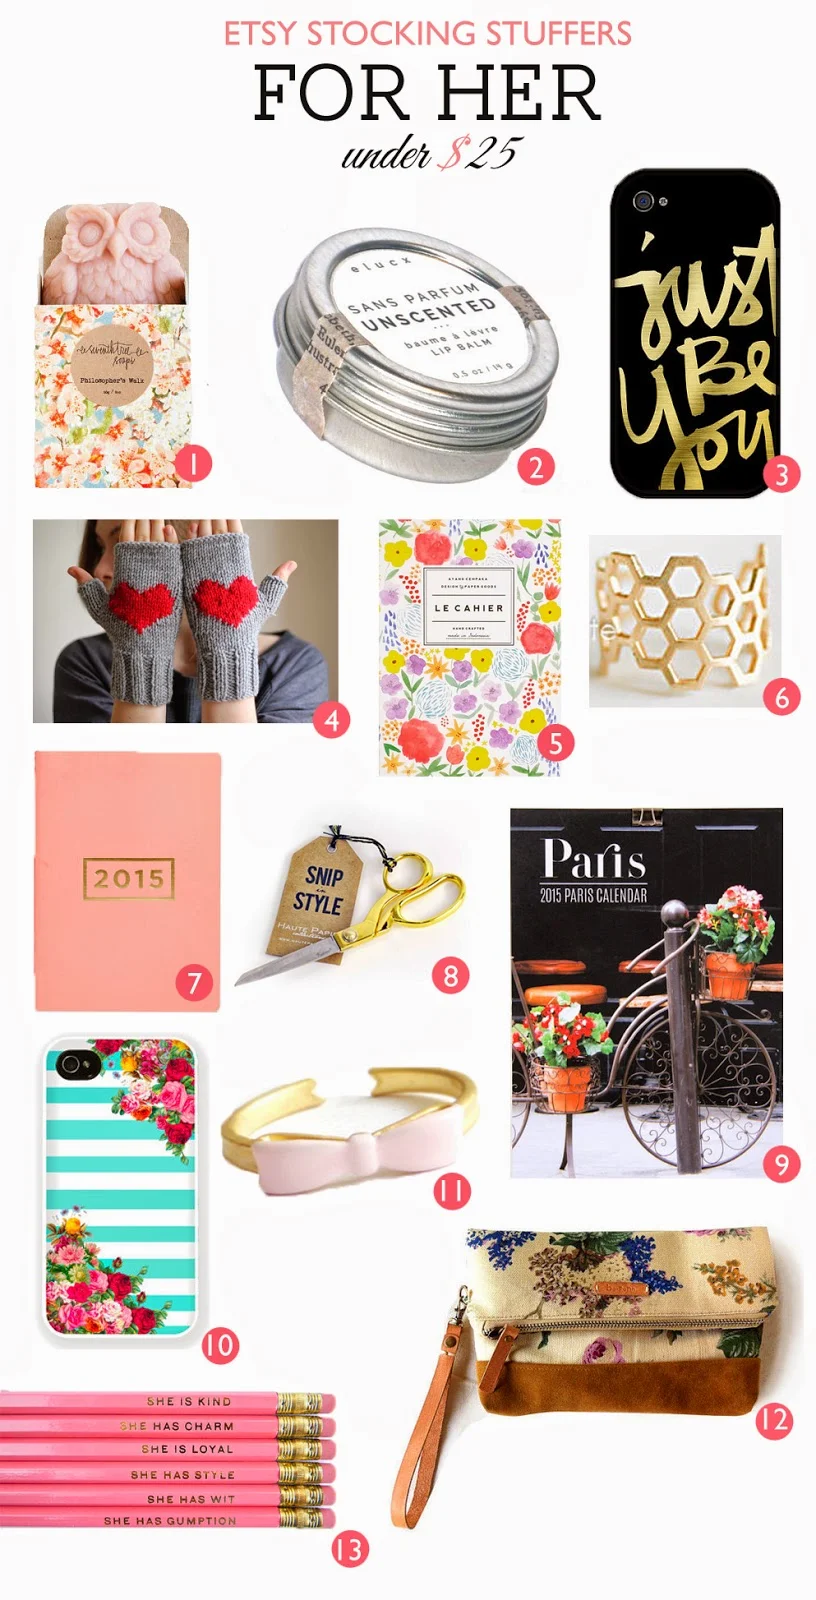 etsy stocking stuffers for her under $25